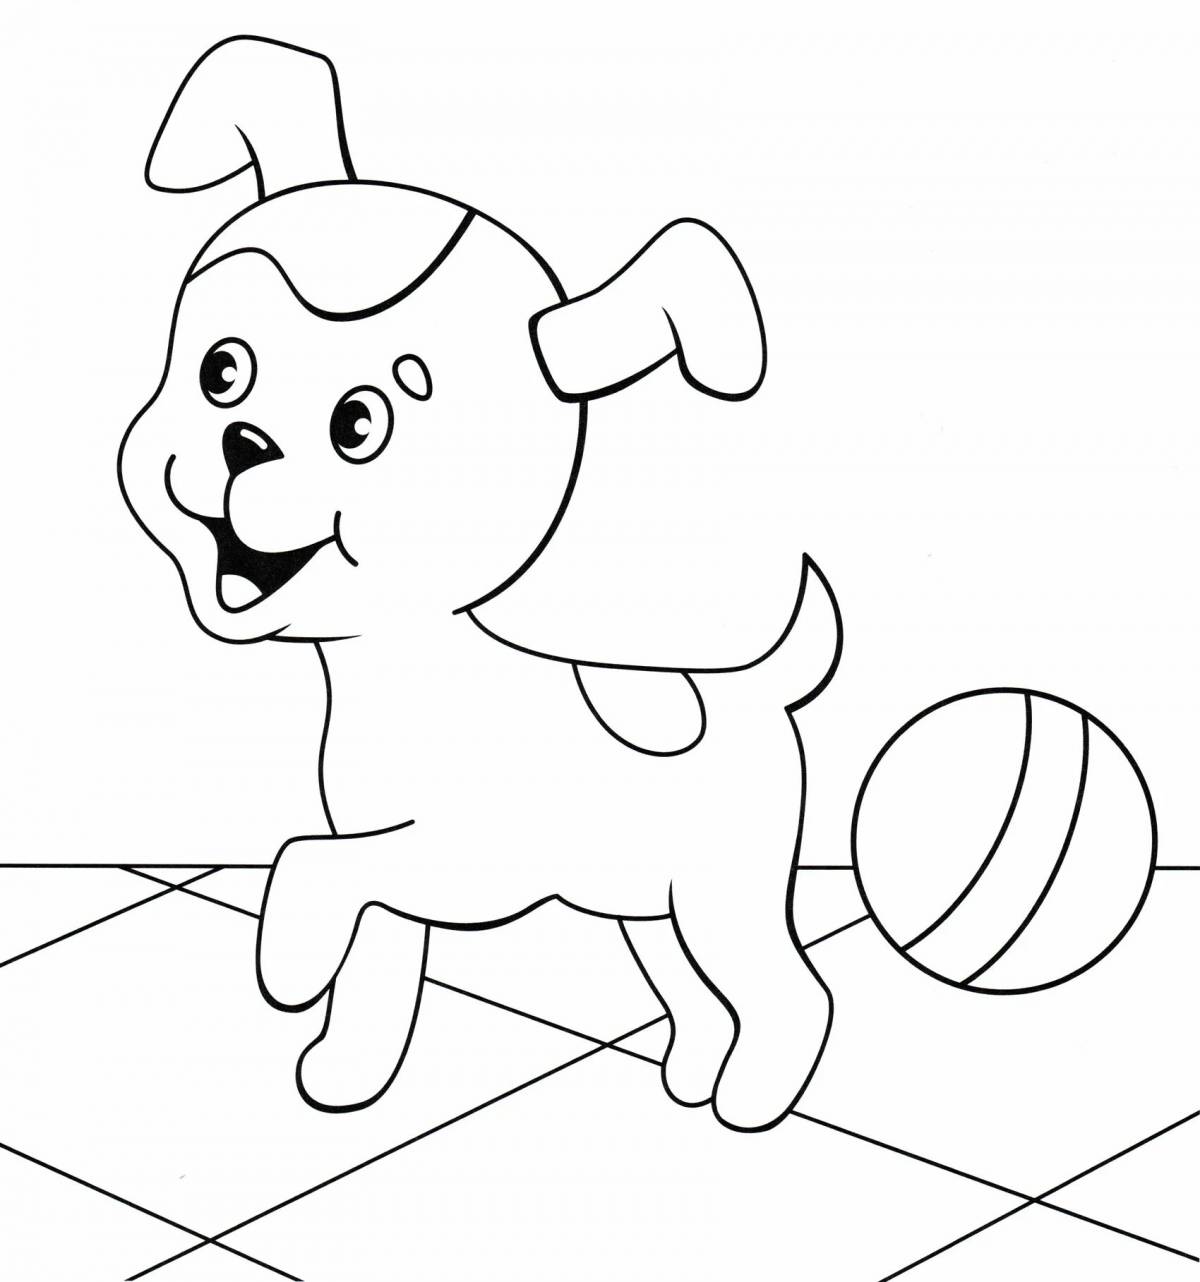 Coloring page smiling blue puppy